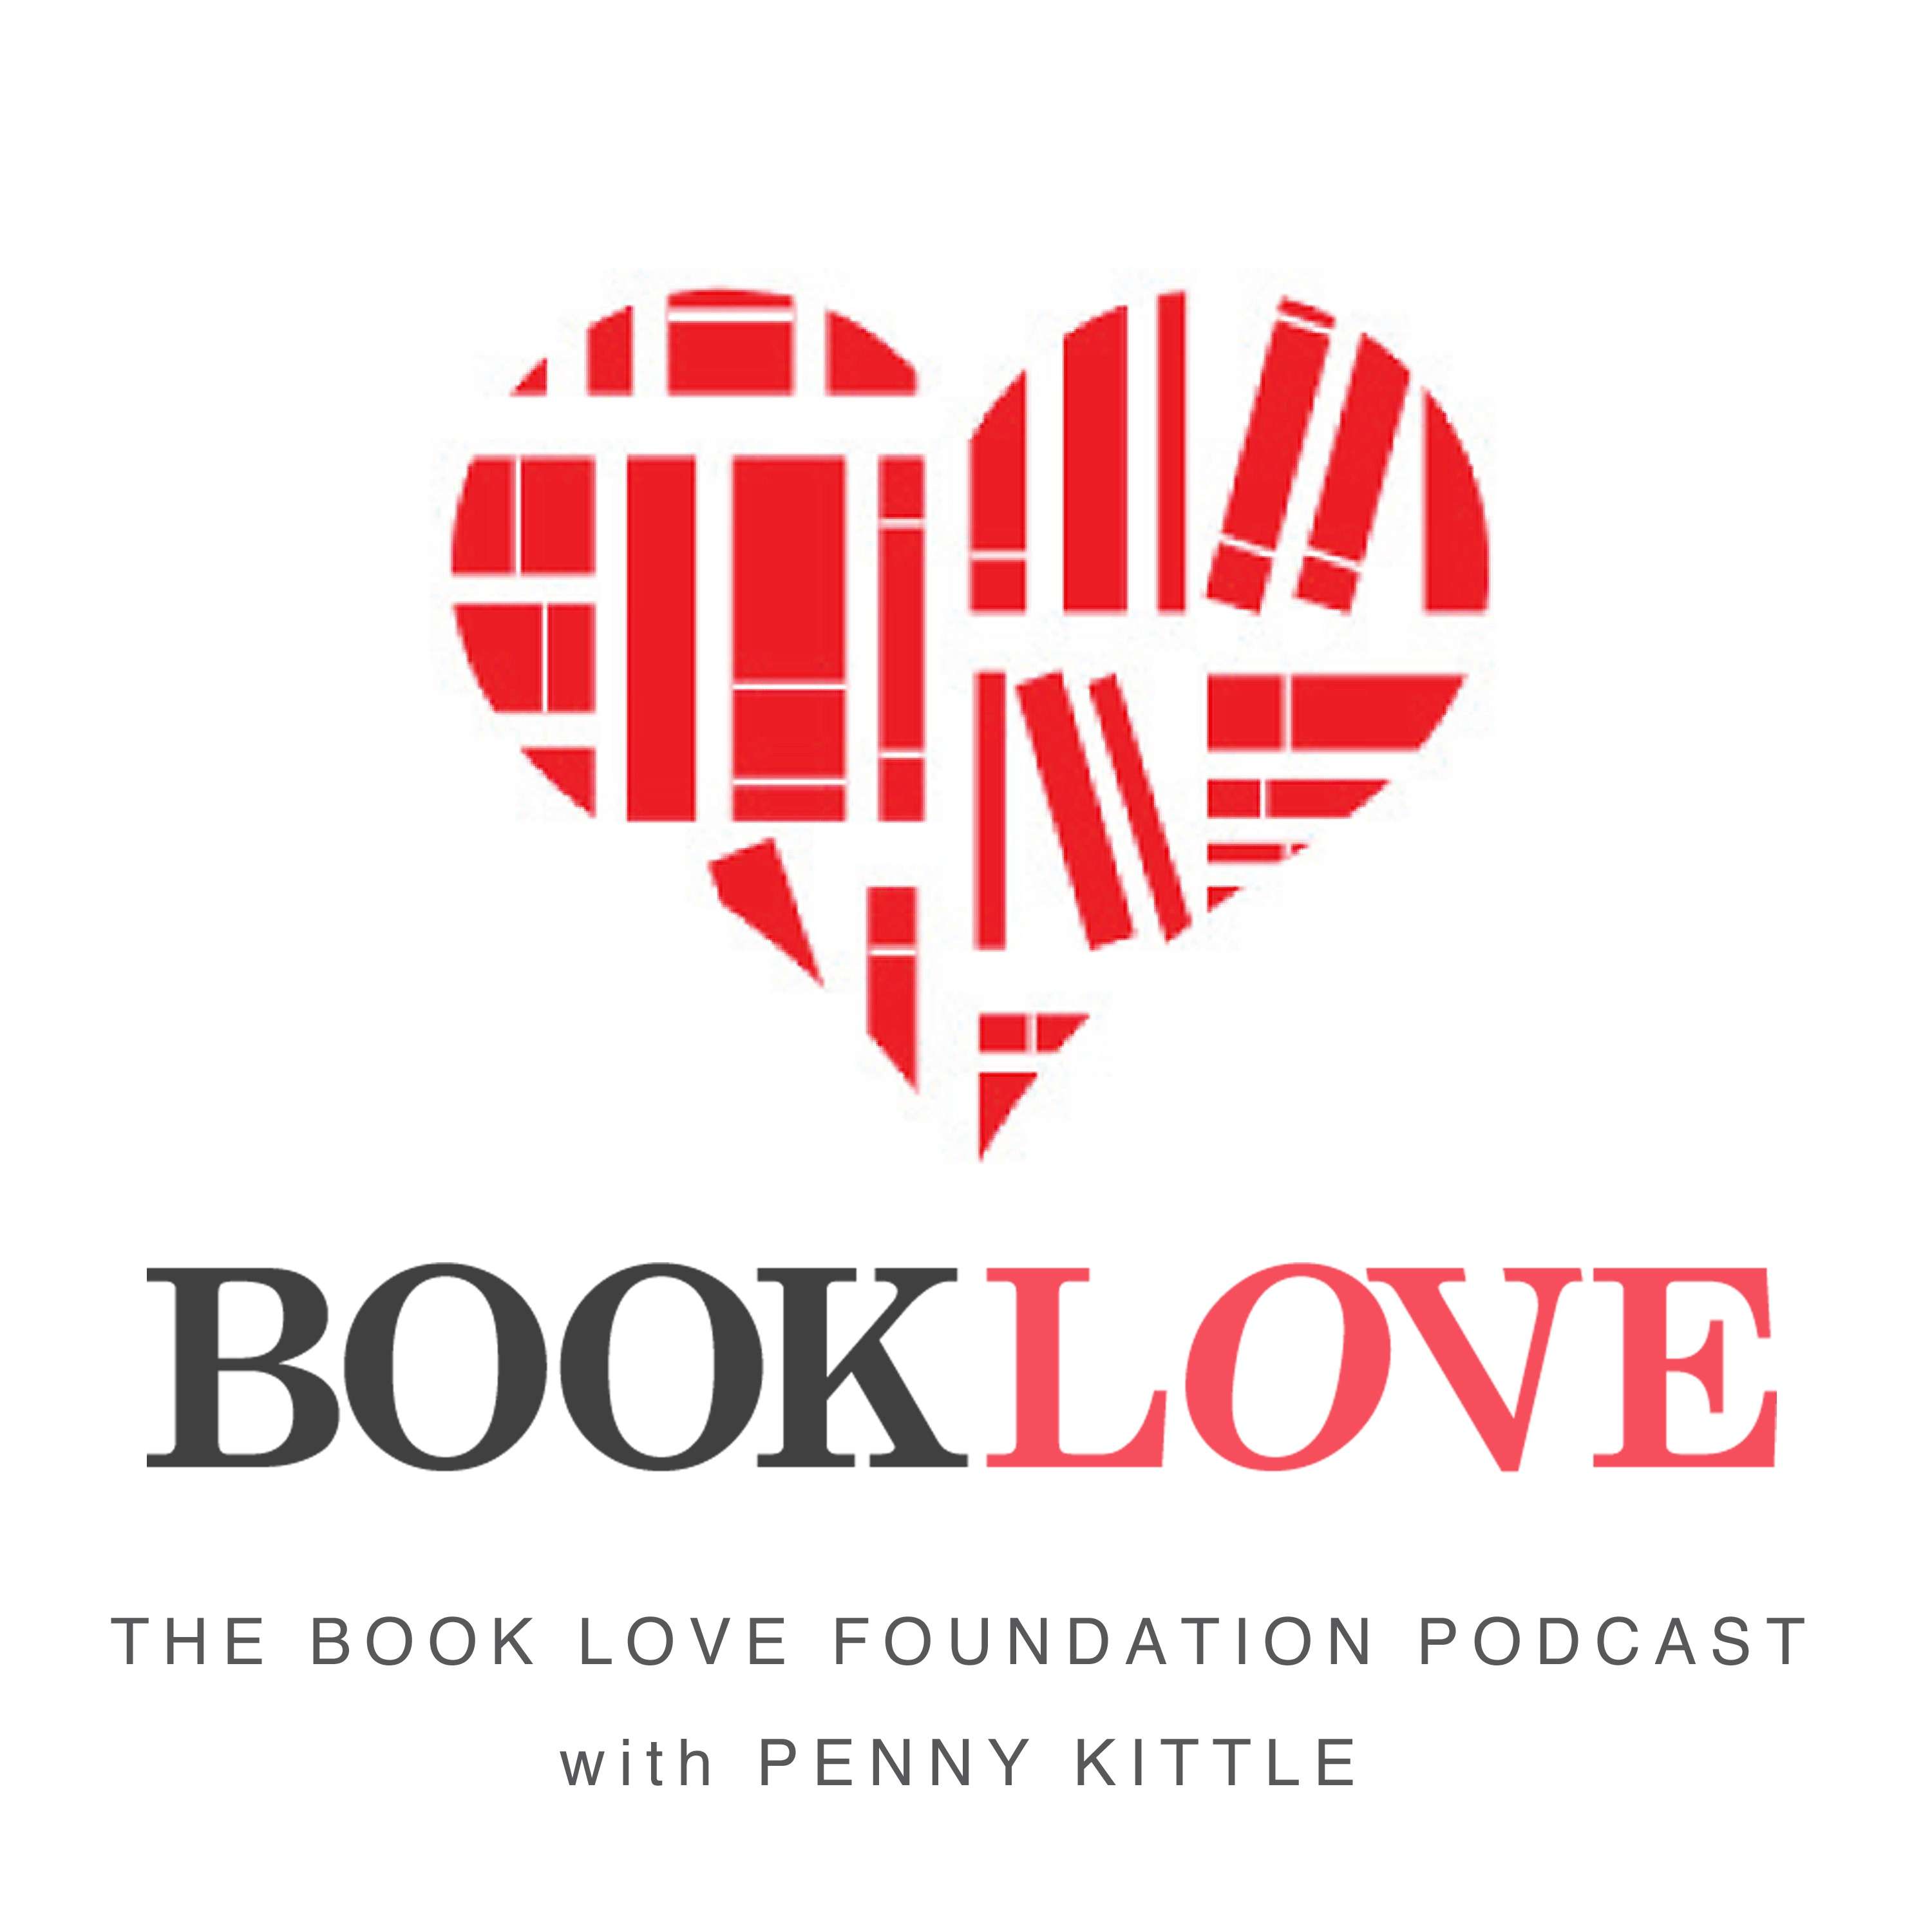 A Conversation with John Irving, Part 2. Season 2 Ep. 12 of the Book Love Foundation Podcast